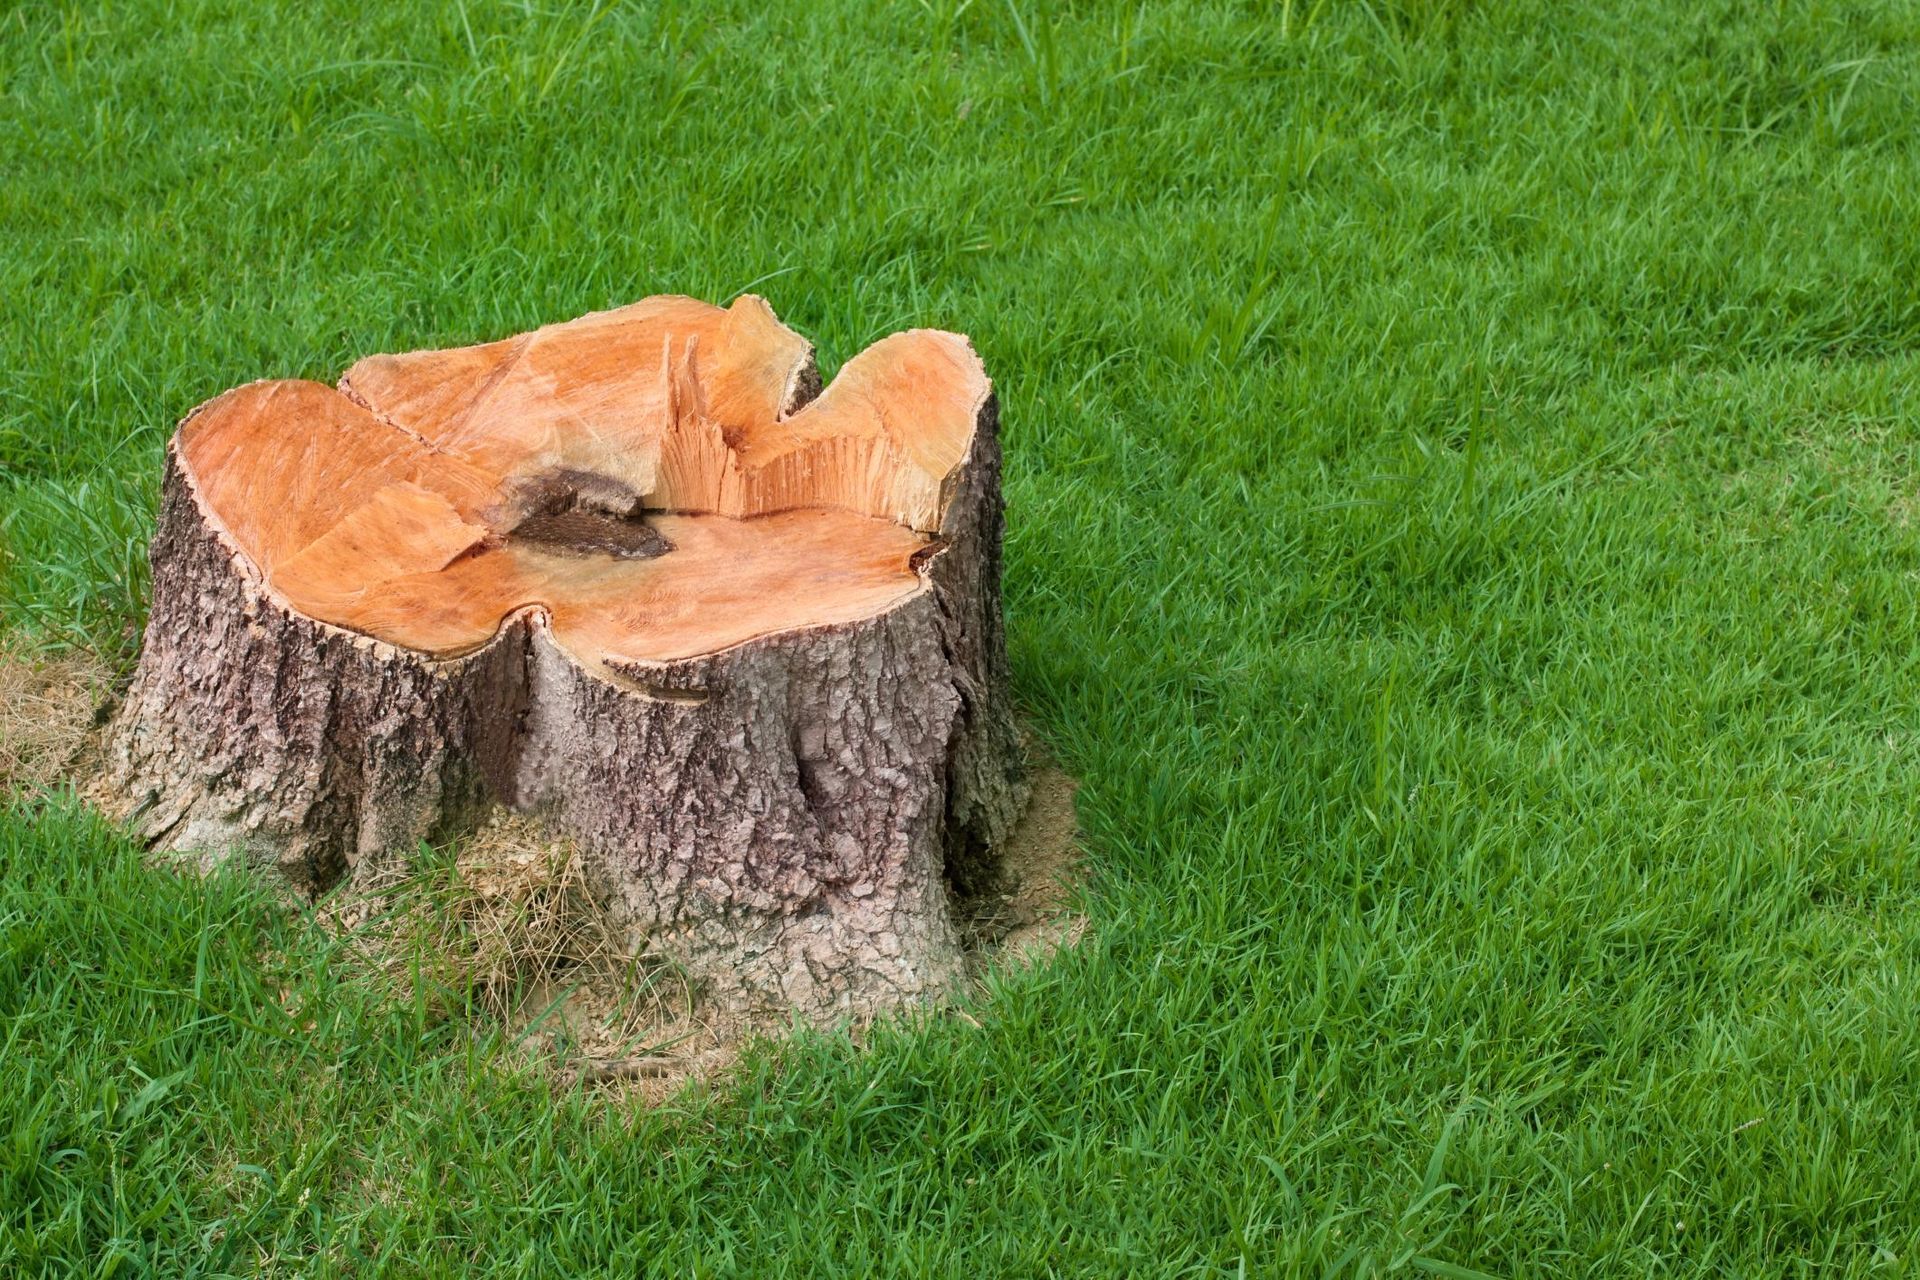 a tree stump that is in the grass